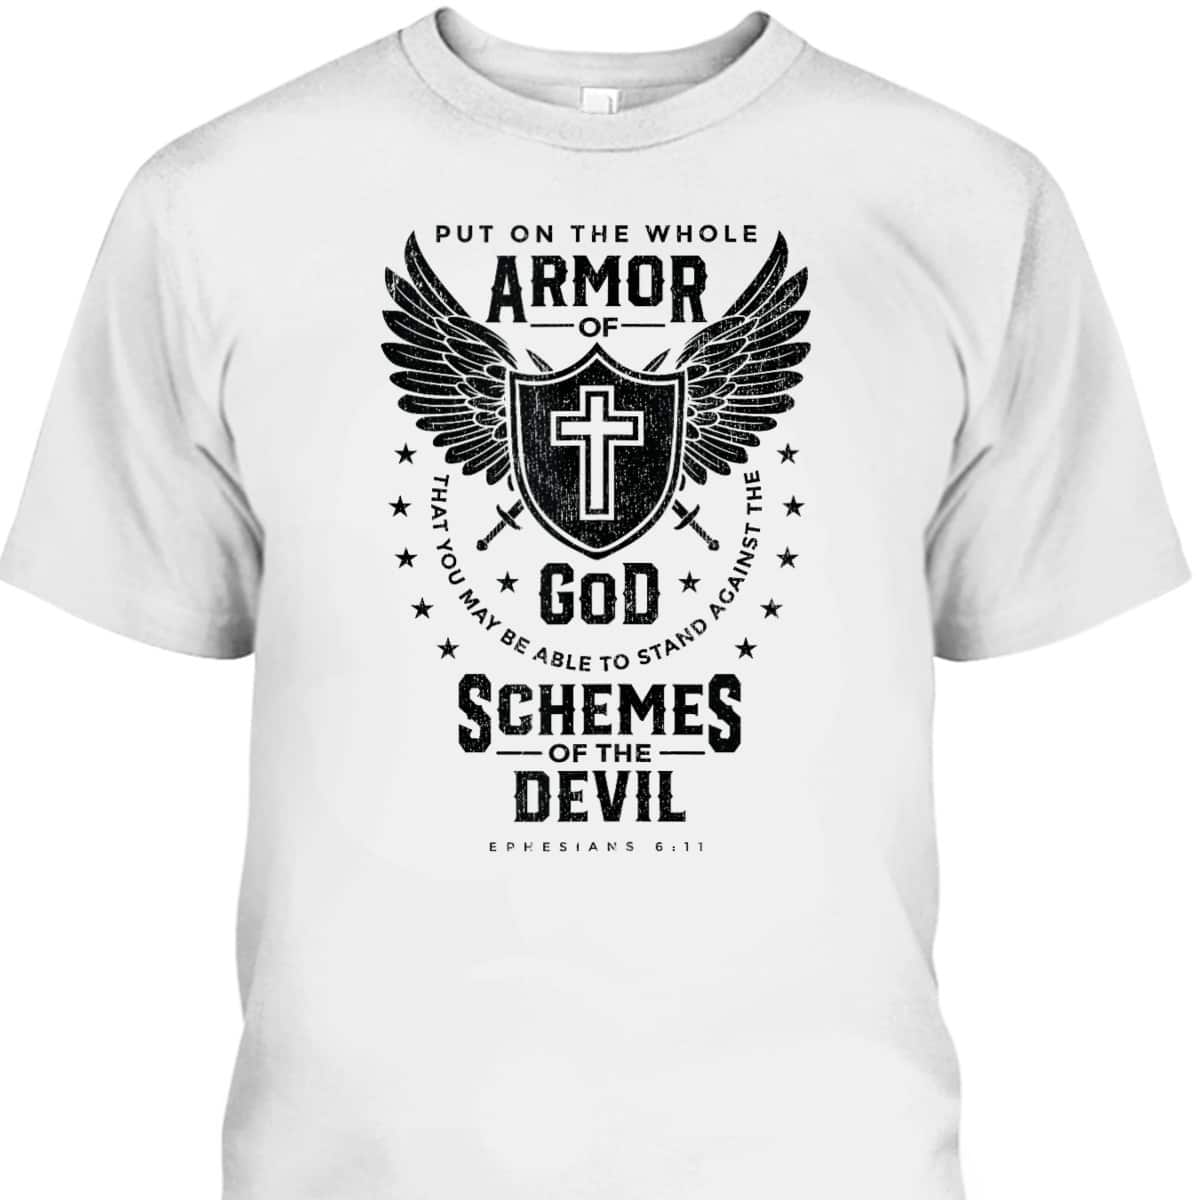 Put On The Whole Armor Of God T-Shirt Bible Verse Religious Gift For Believers